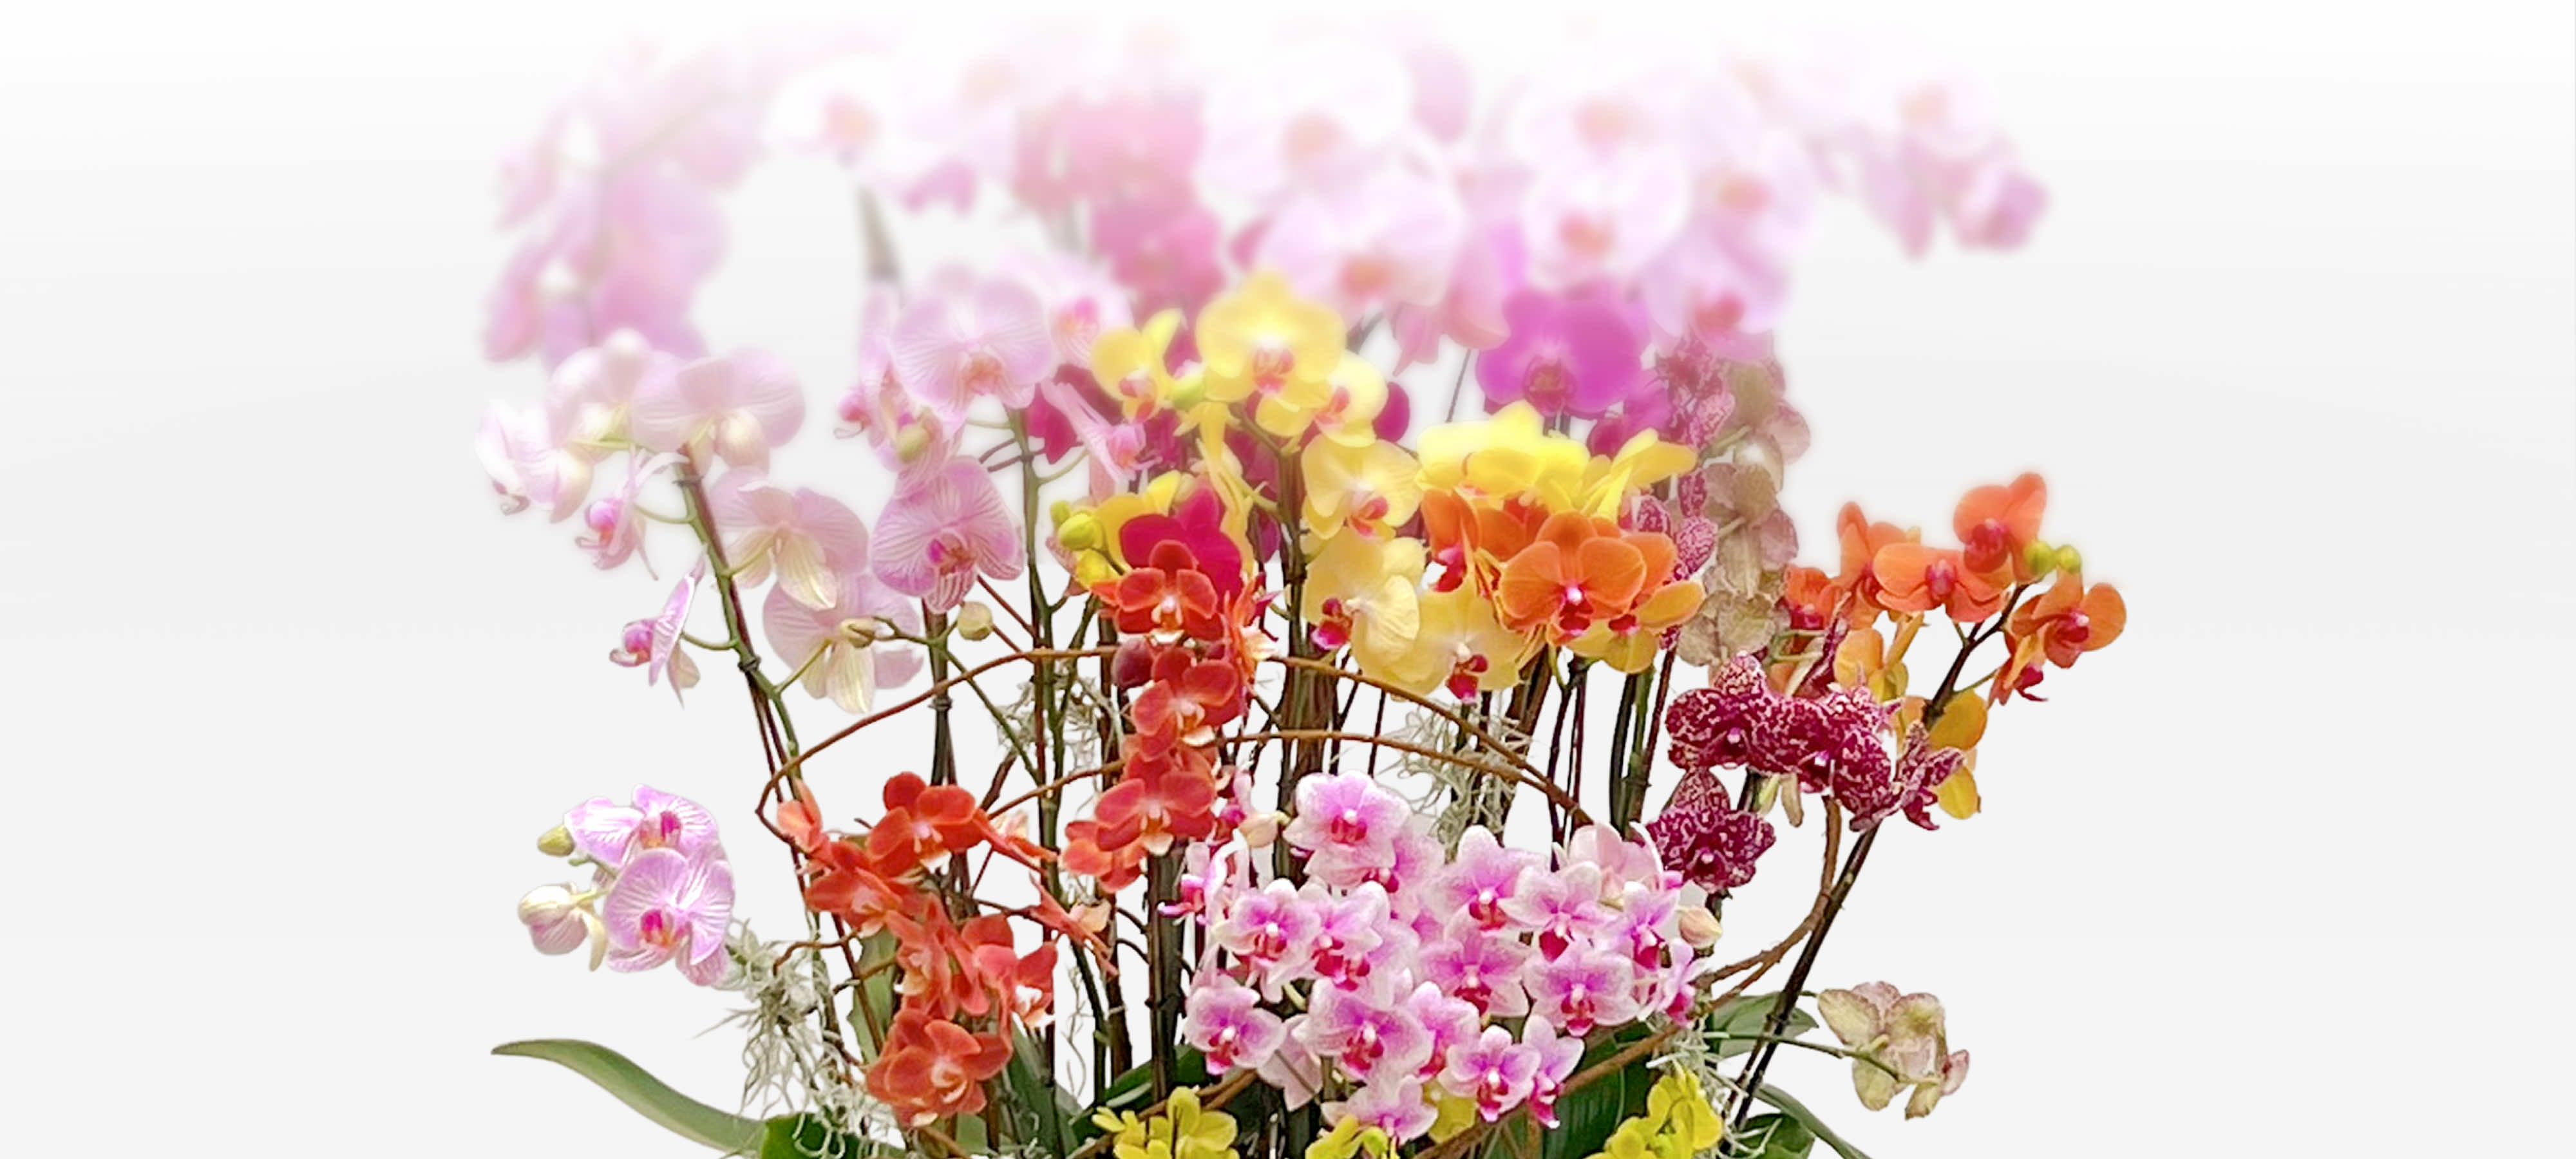 Luxurious garden of colorful orchids